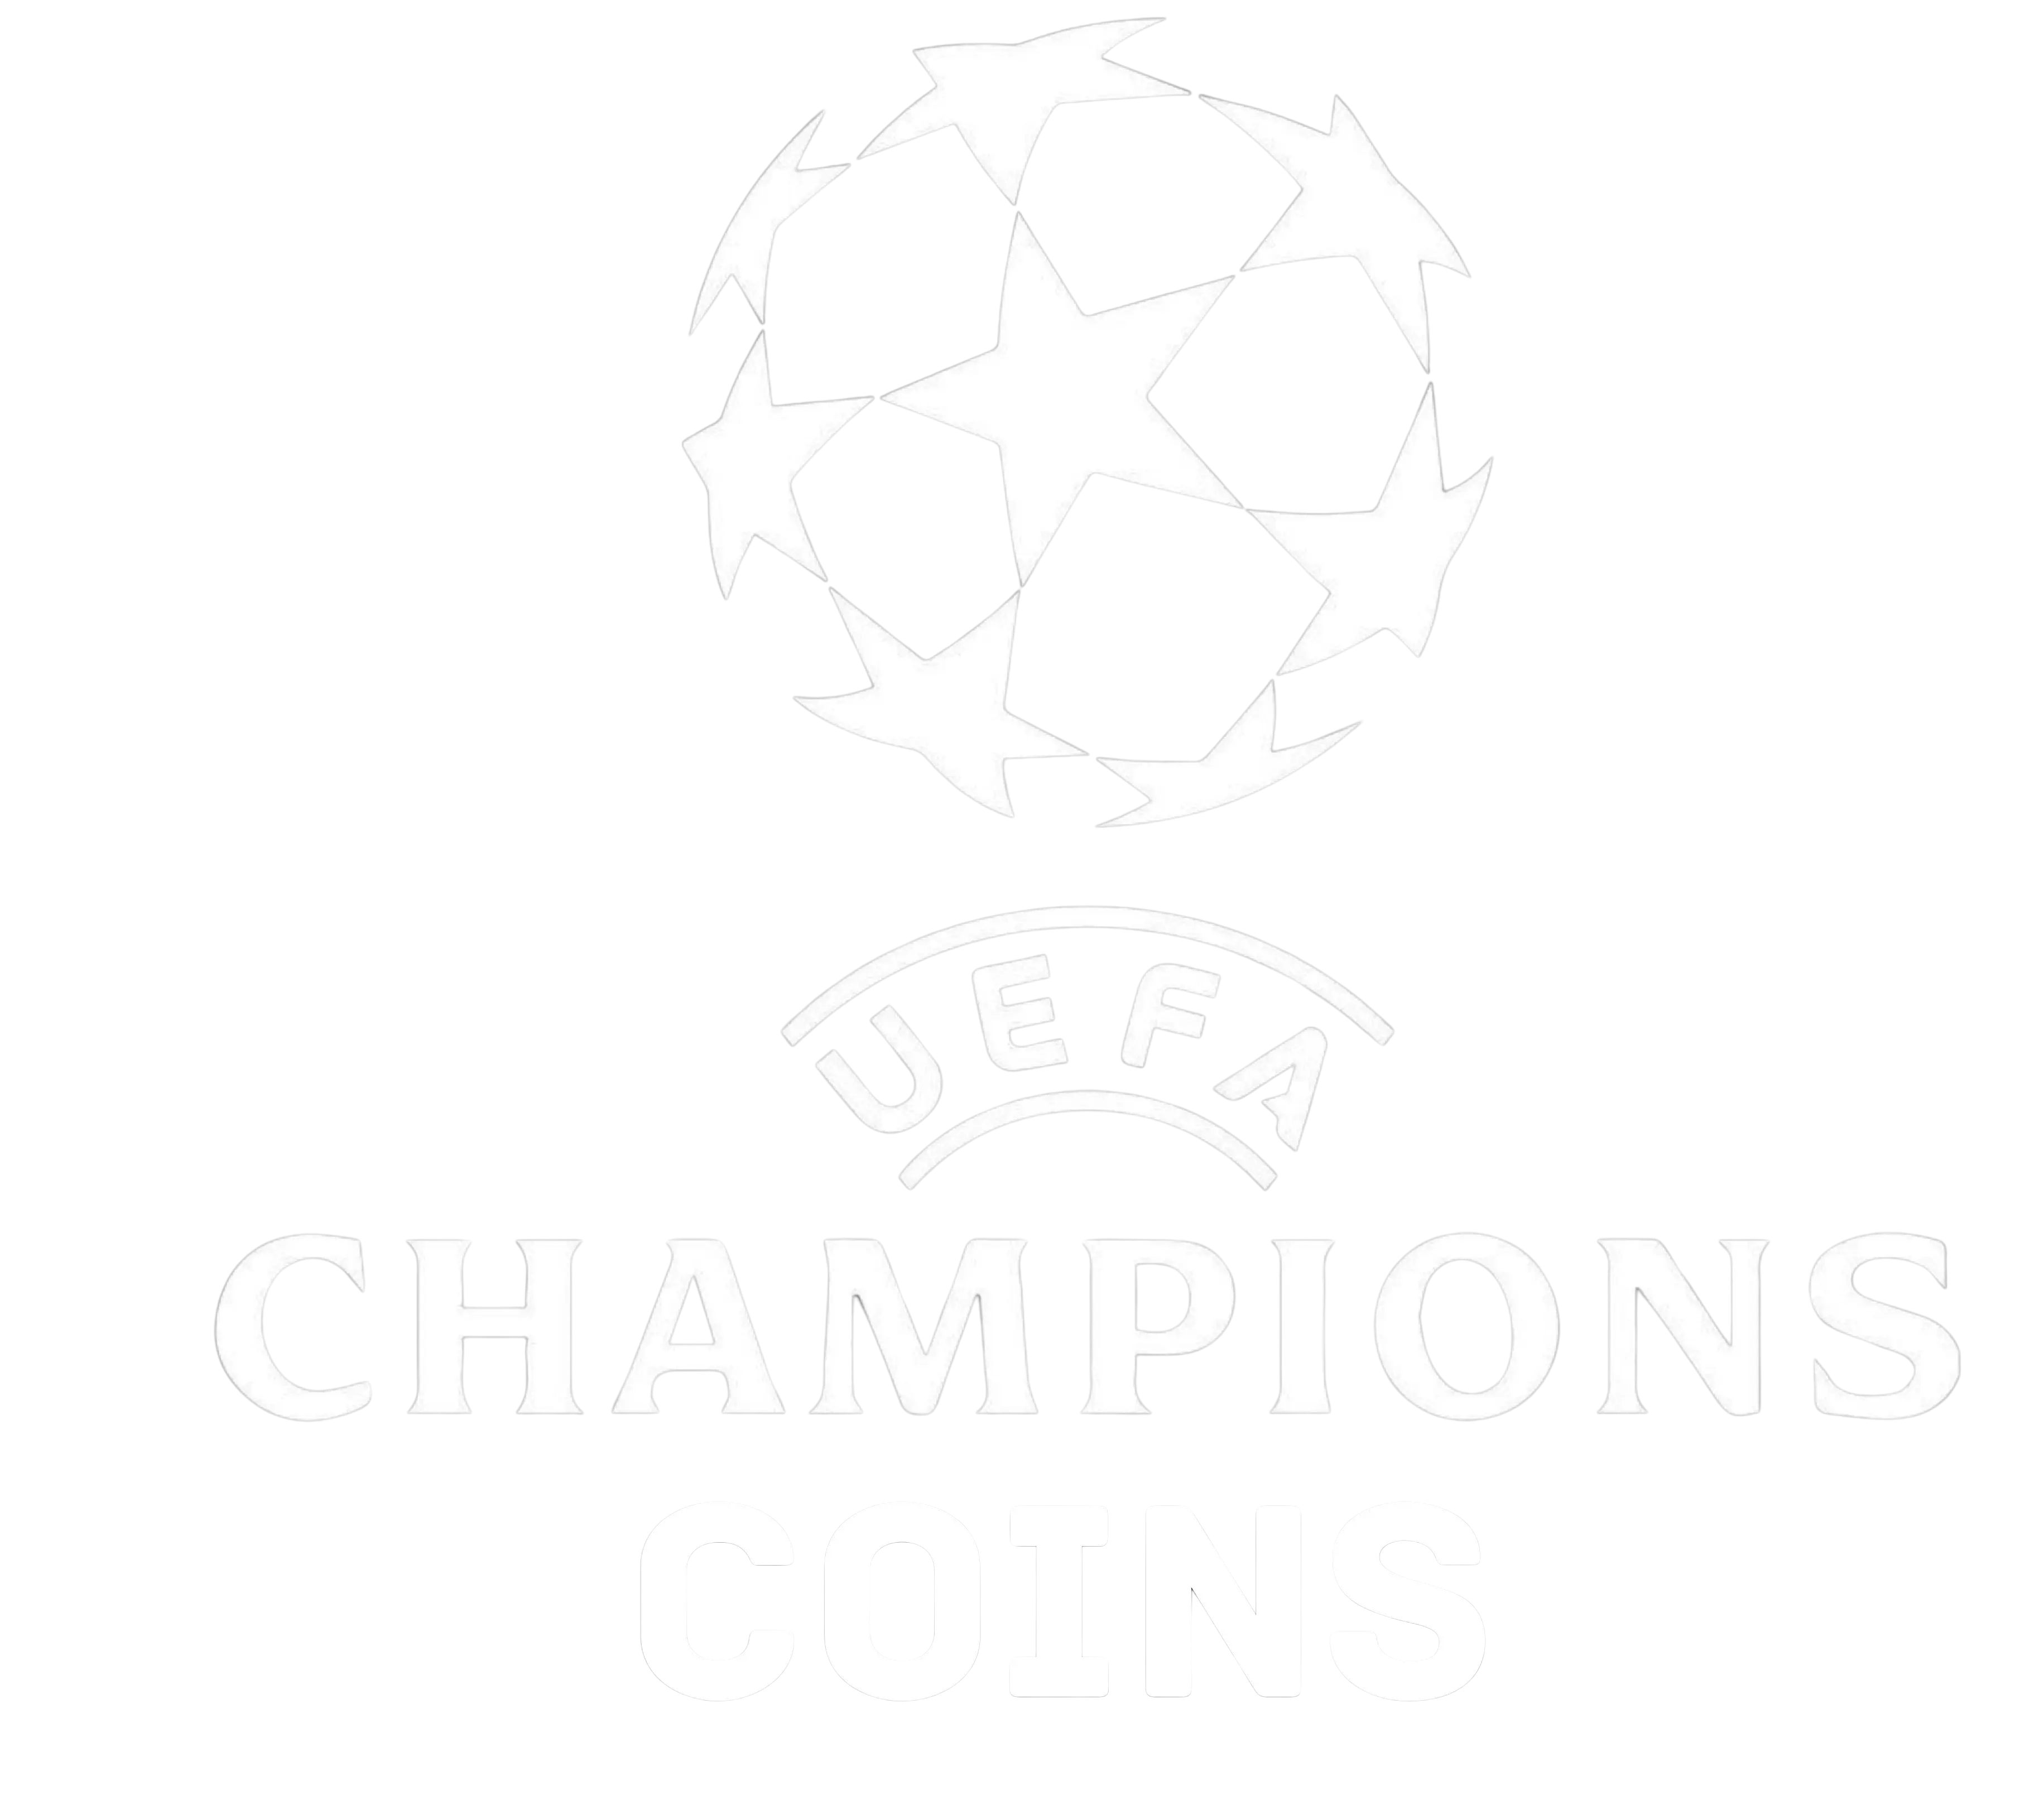 Small Champions Coins logo image